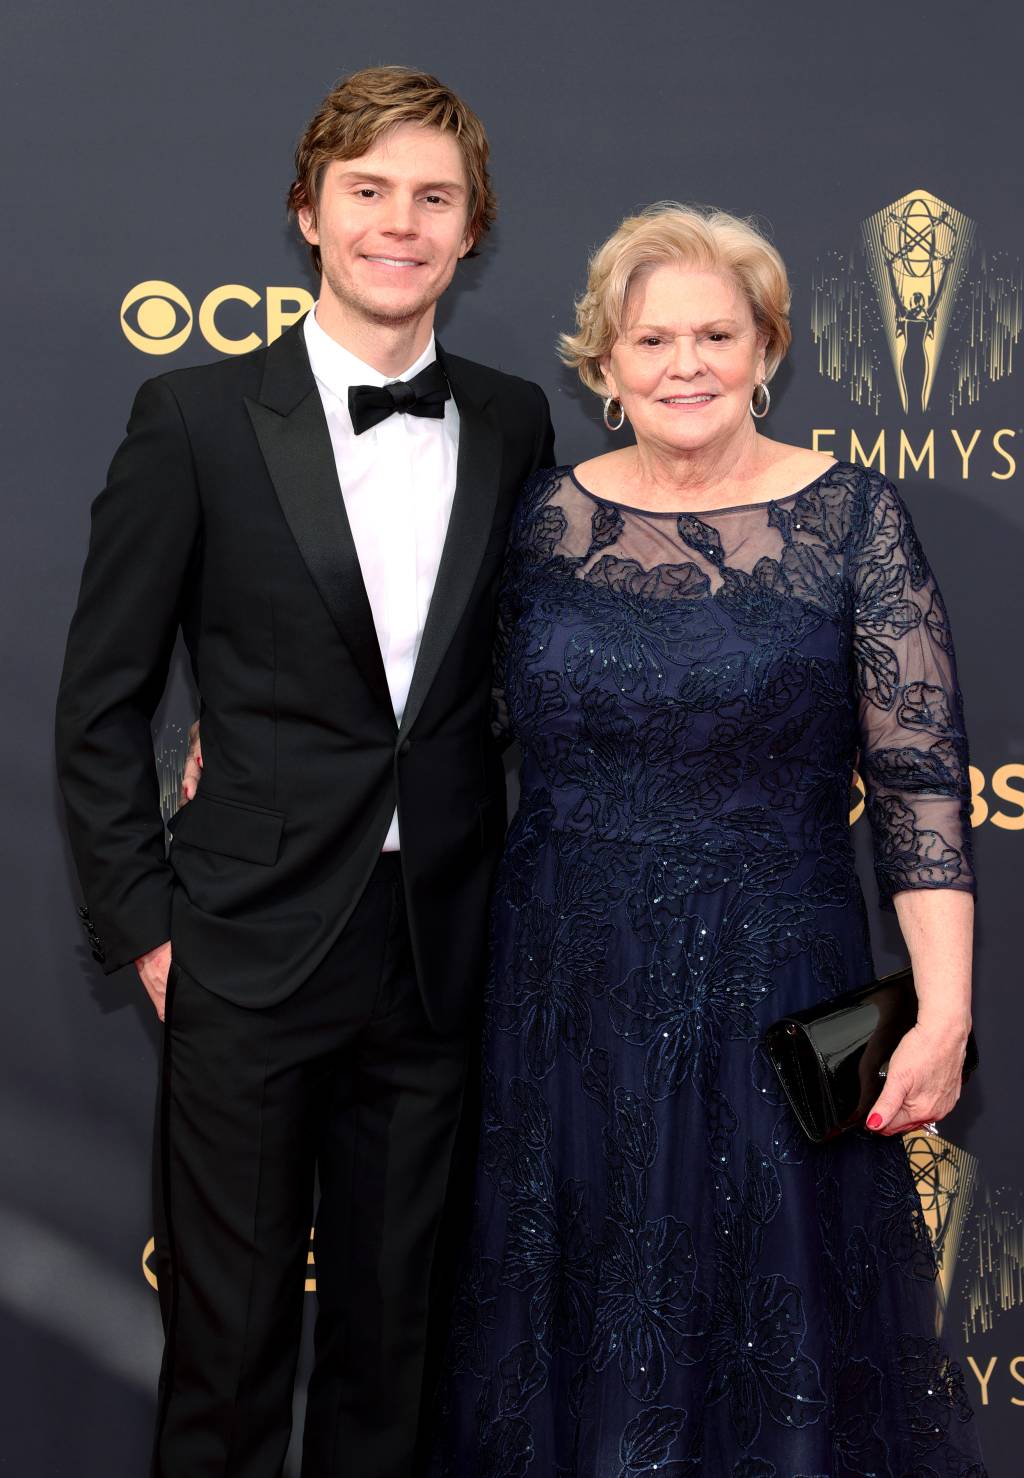 LOS ANGELES, CALIFORNIA - SEPTEMBER 19: (L-R) Evan Peters and Julie Peters attend the 73rd Primetime Emmy Awards at L.A. LIVE on September 19, 2021 in Los Angeles, California. (Photo by Rich Fury/Getty Images)